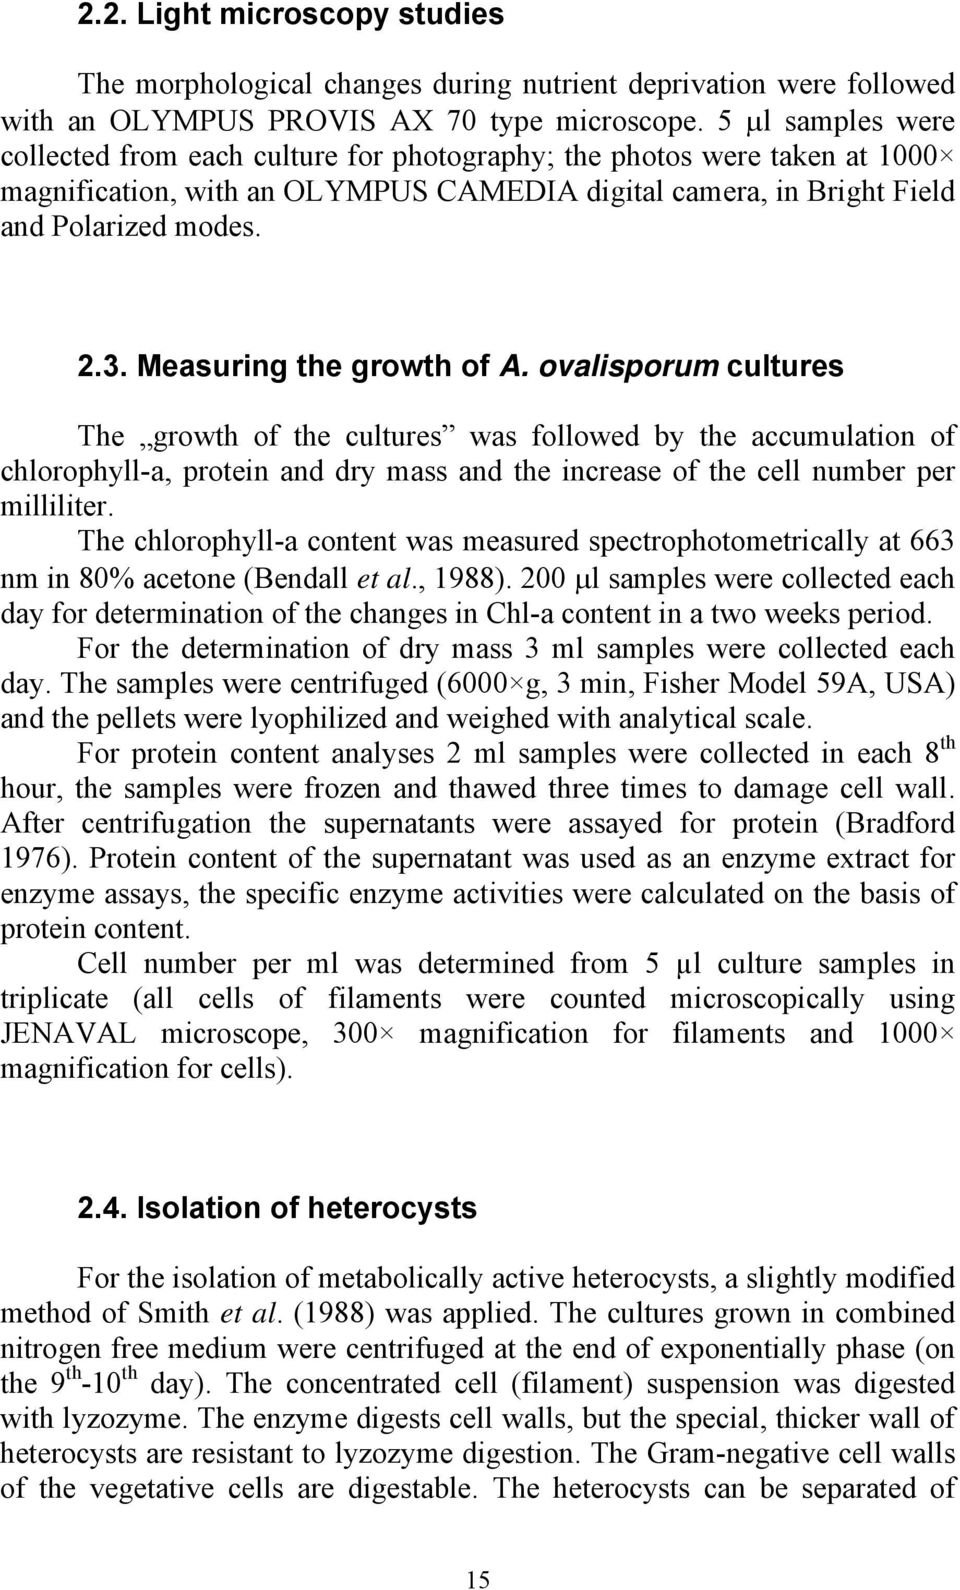 Measuring the growth of A. ovalisporum cultures The growth of the cultures was followed by the accumulation of chlorophyll-a, protein and dry mass and the increase of the cell number per milliliter.